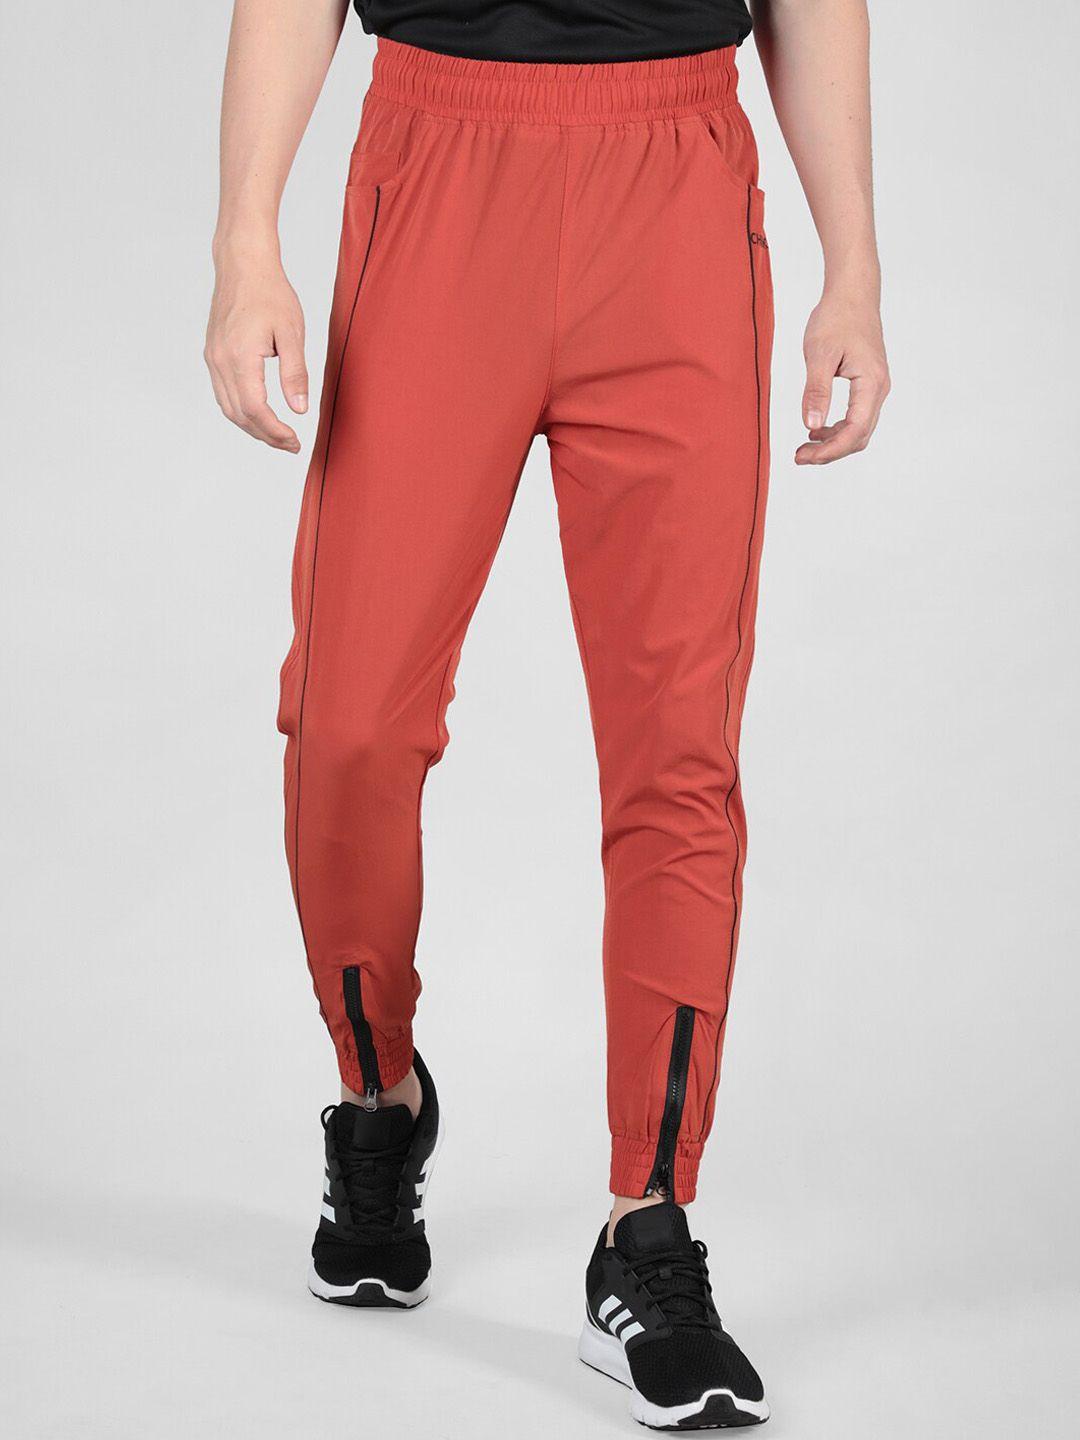 chkokko men relaxed fit mid-rise sports joggers